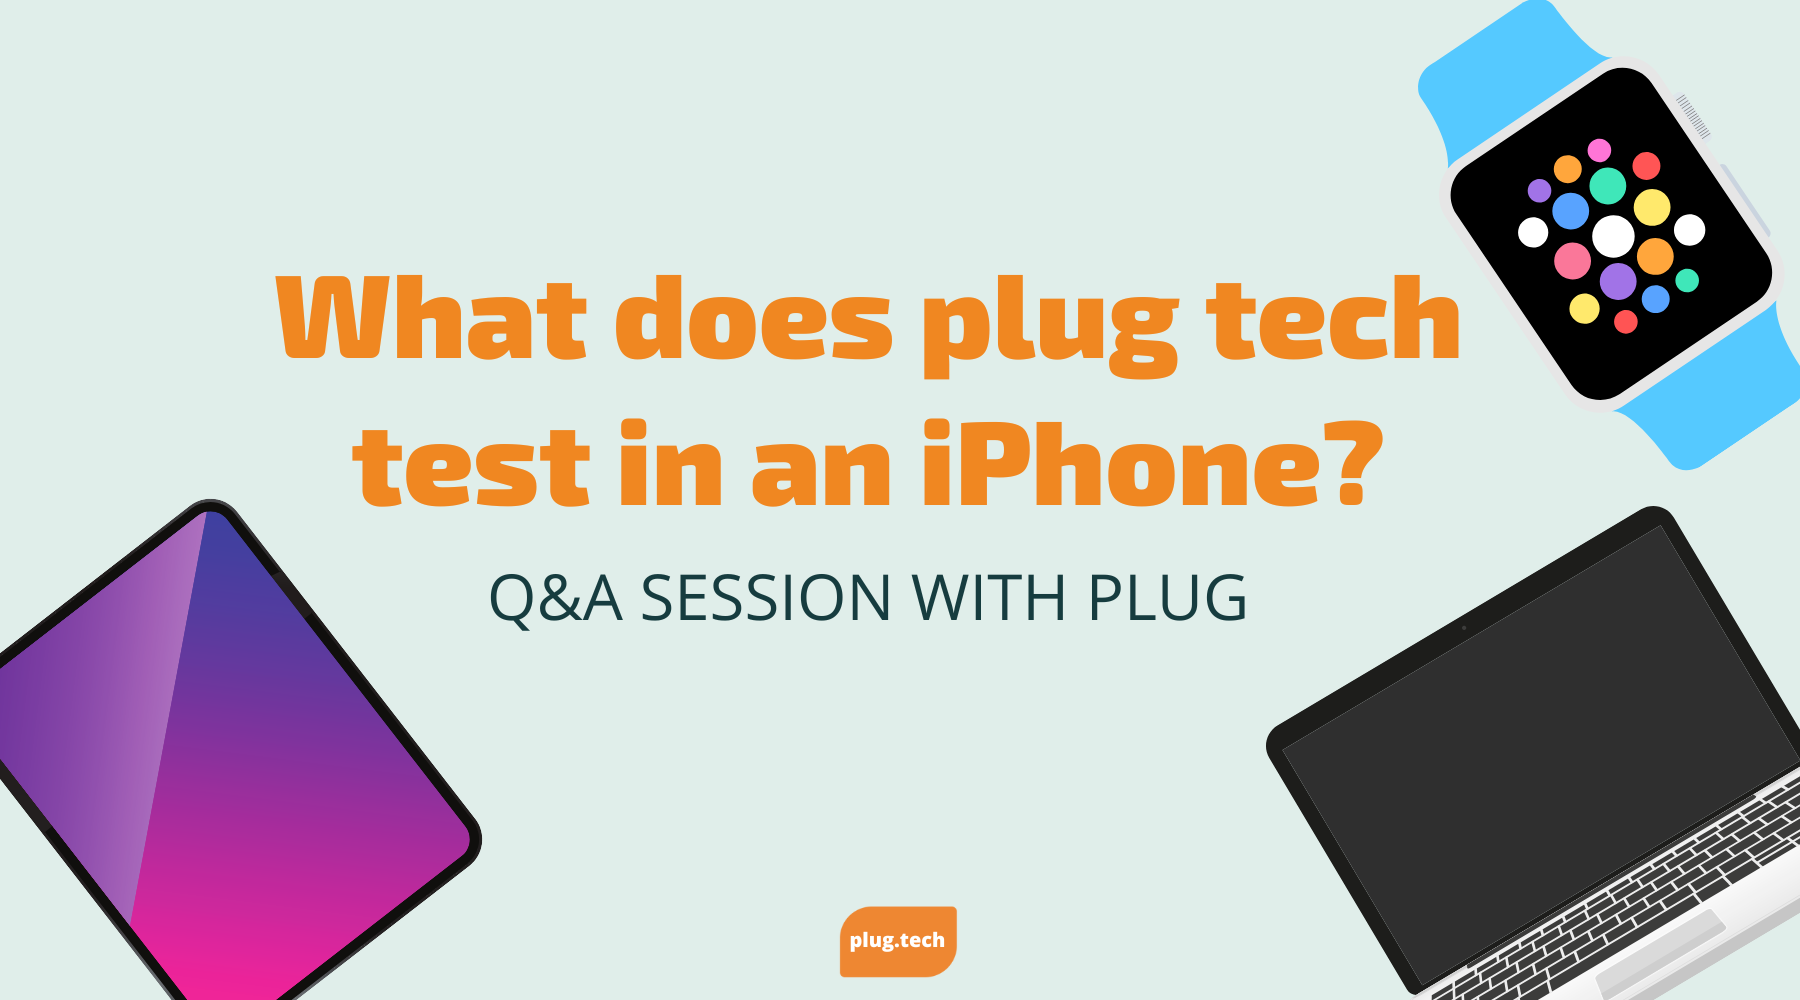 What does plug tech test in an iPhone?